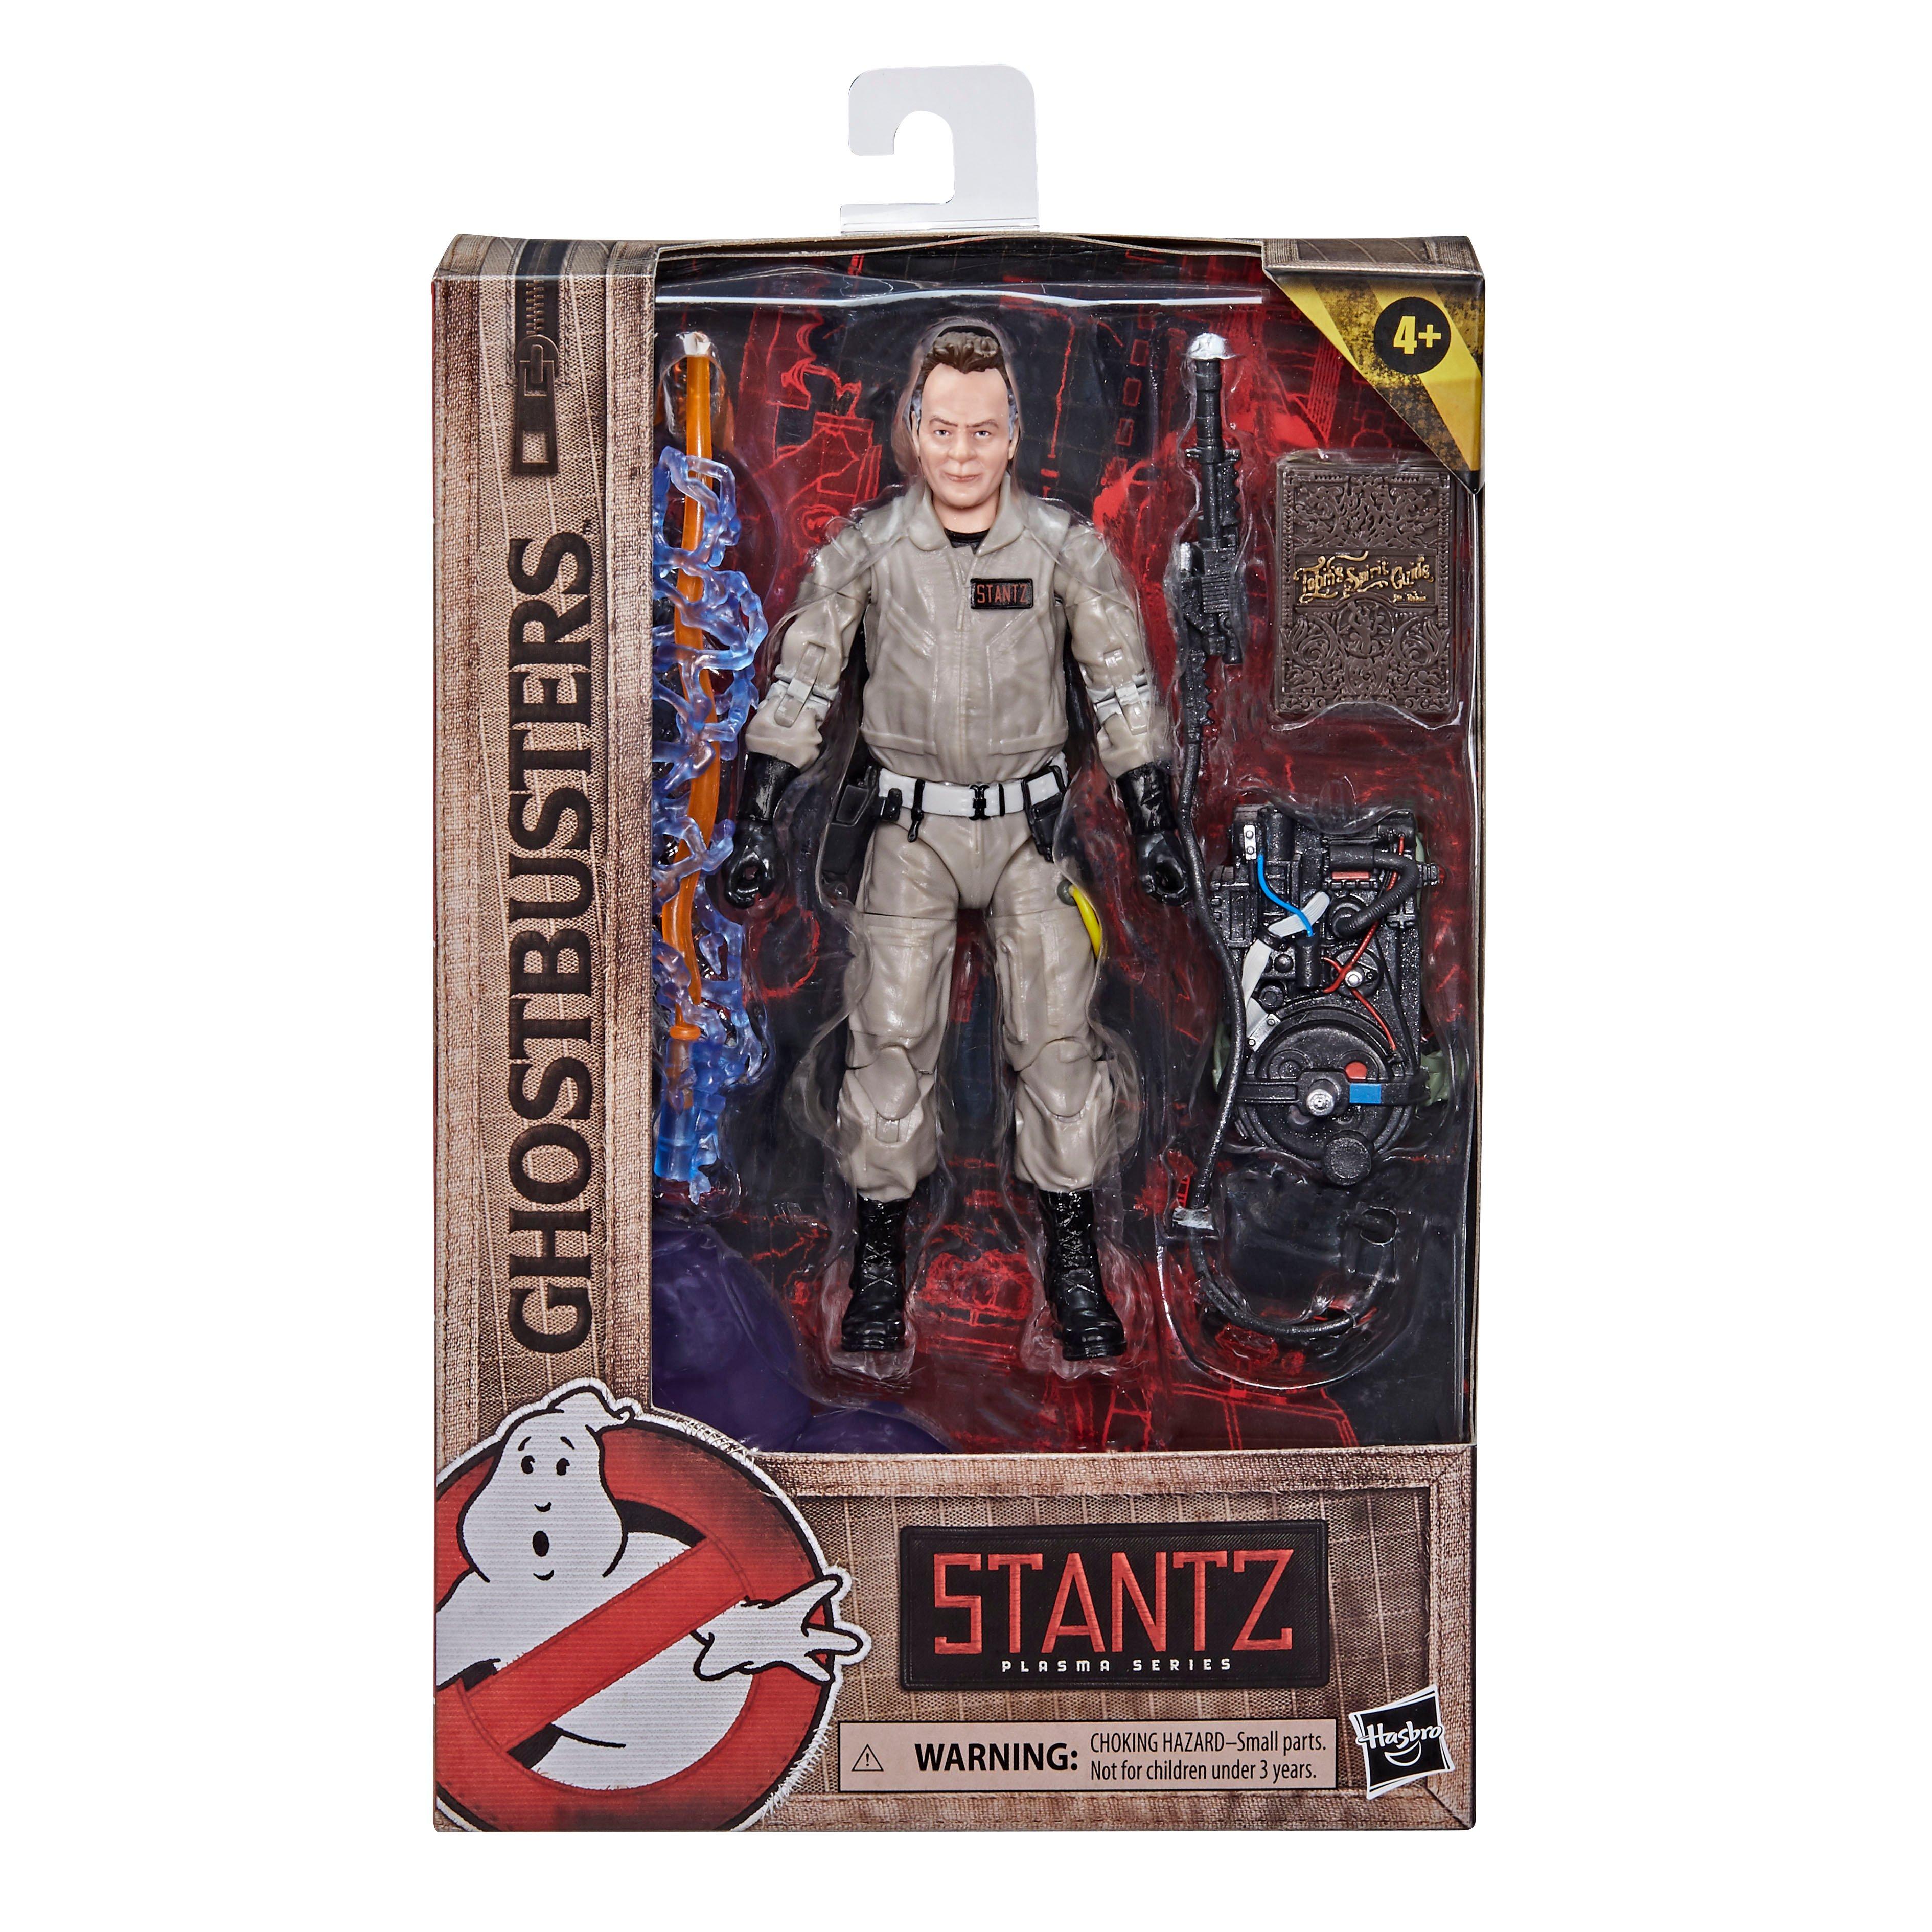 Details about   Ghostbusters Plasma Series Ray Stantz Toy 6-Inch-Scale Collectible Classic 1984 